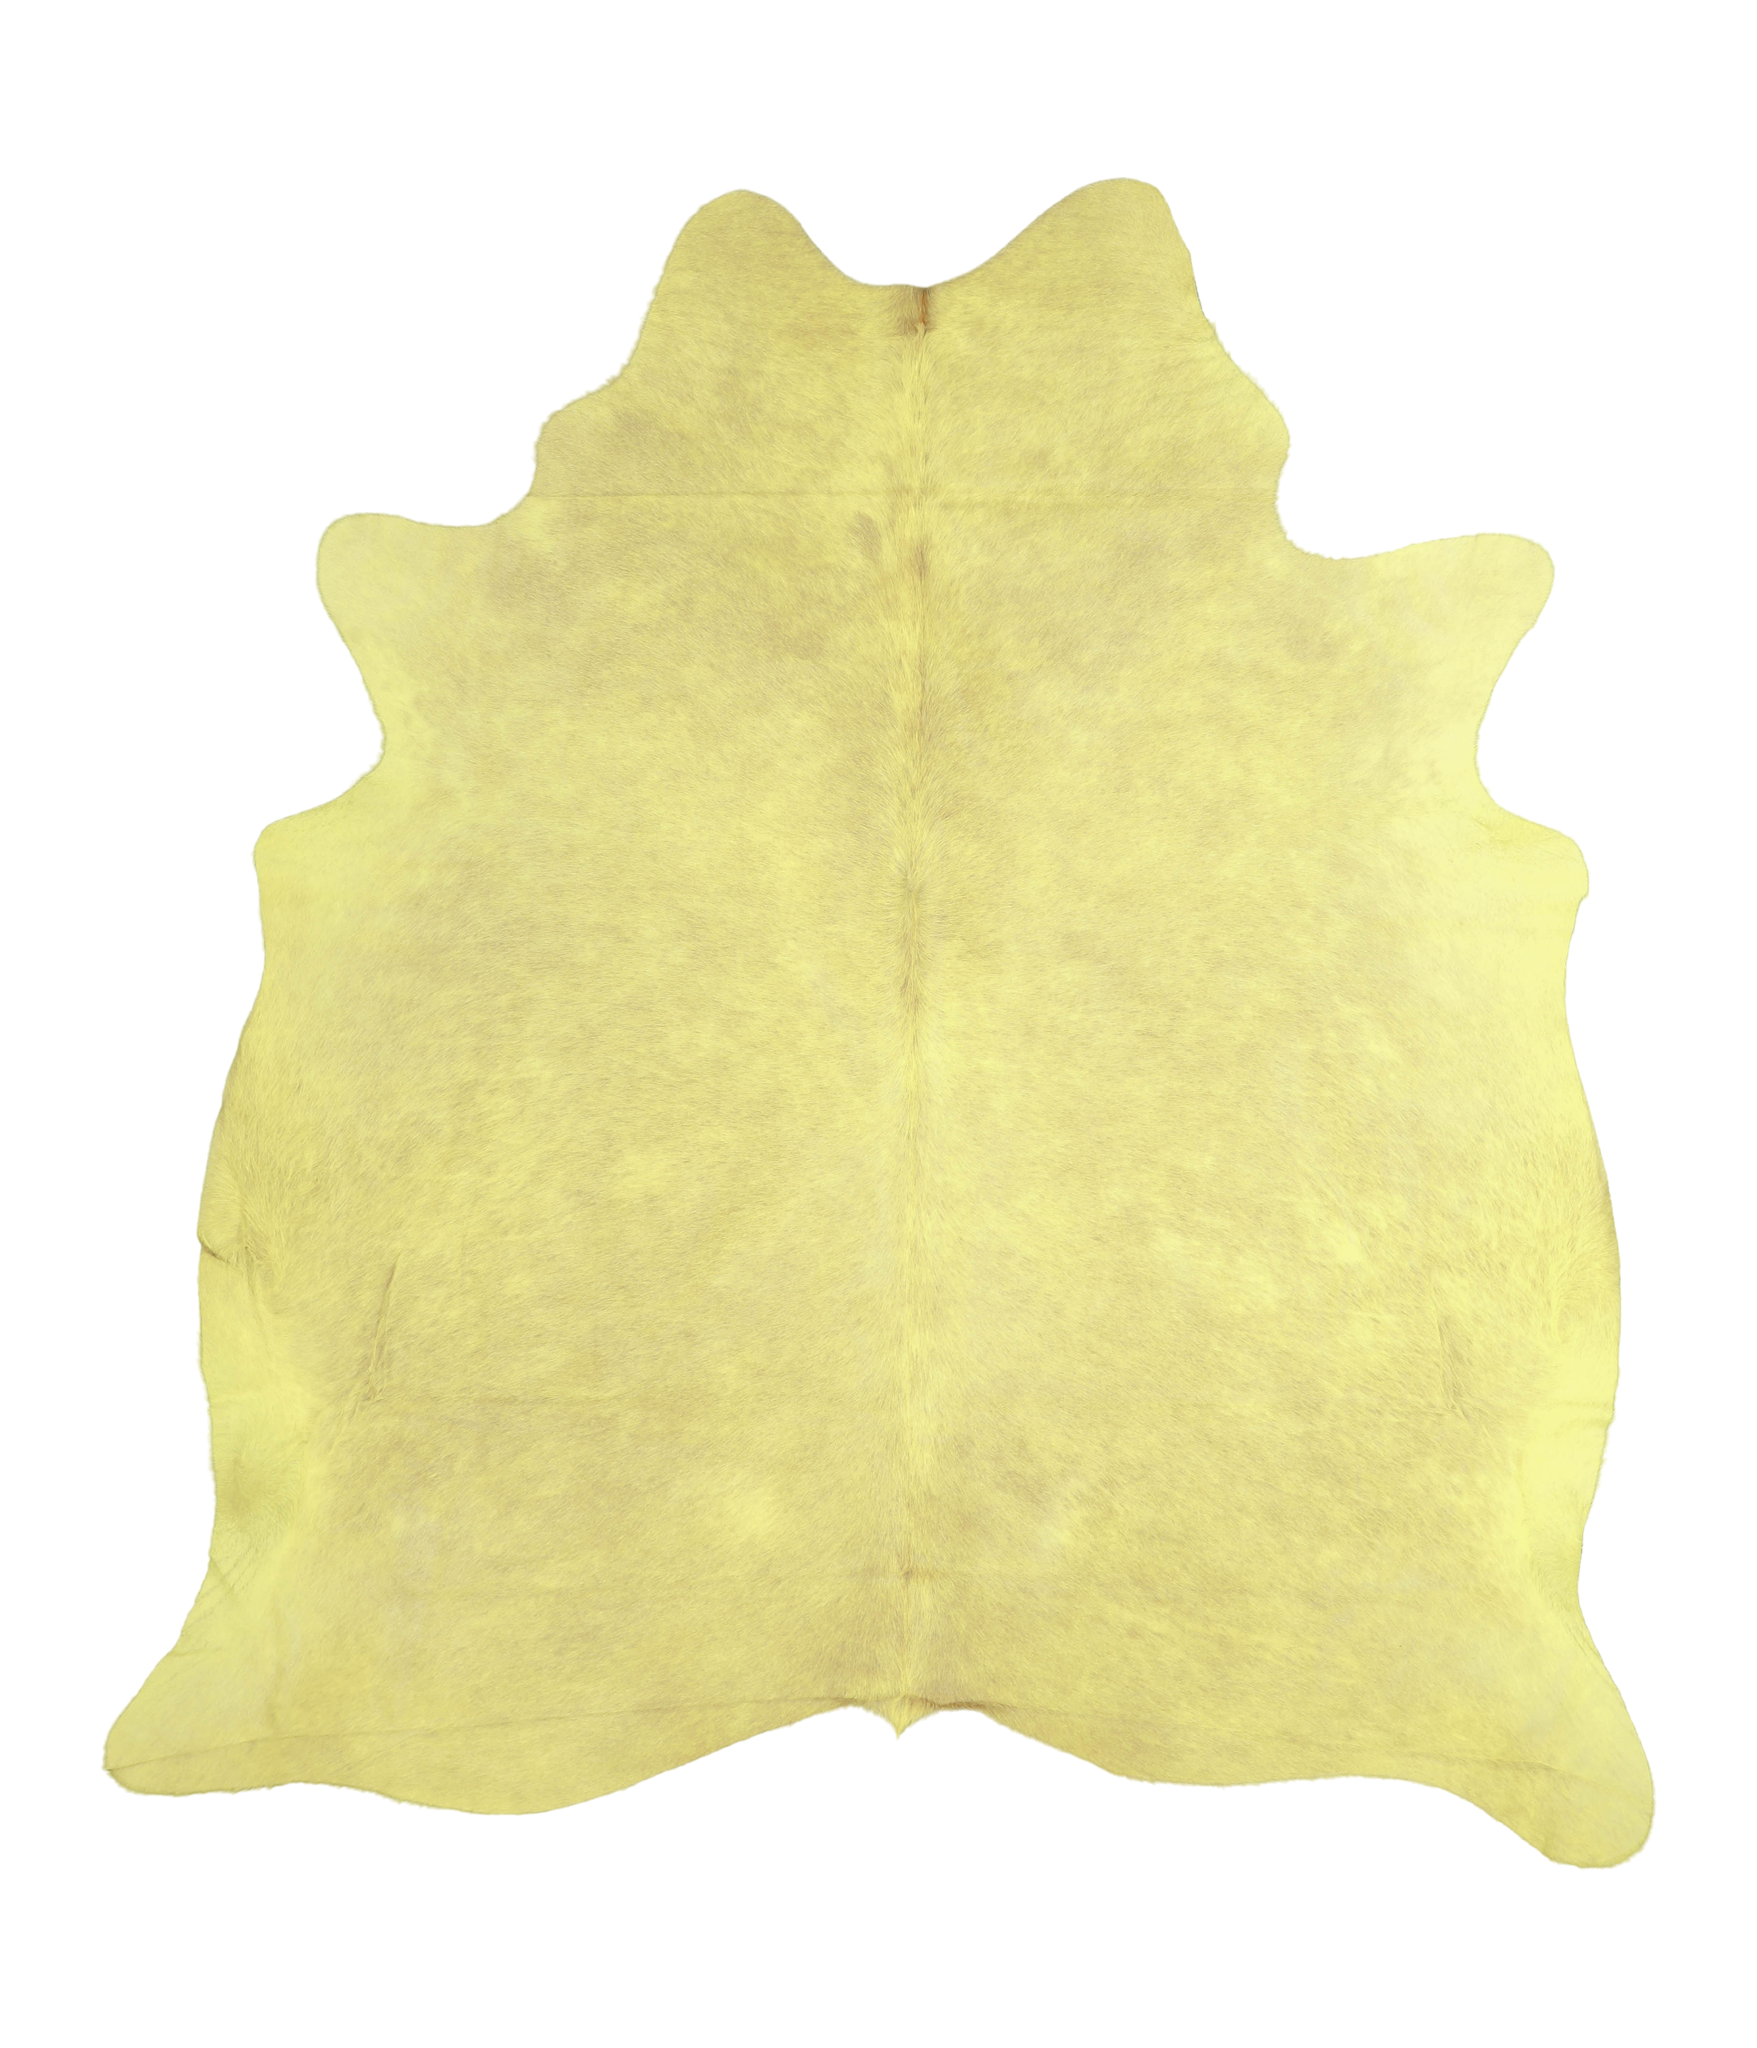 Dyed Yellow Cowhide Rug #A20177